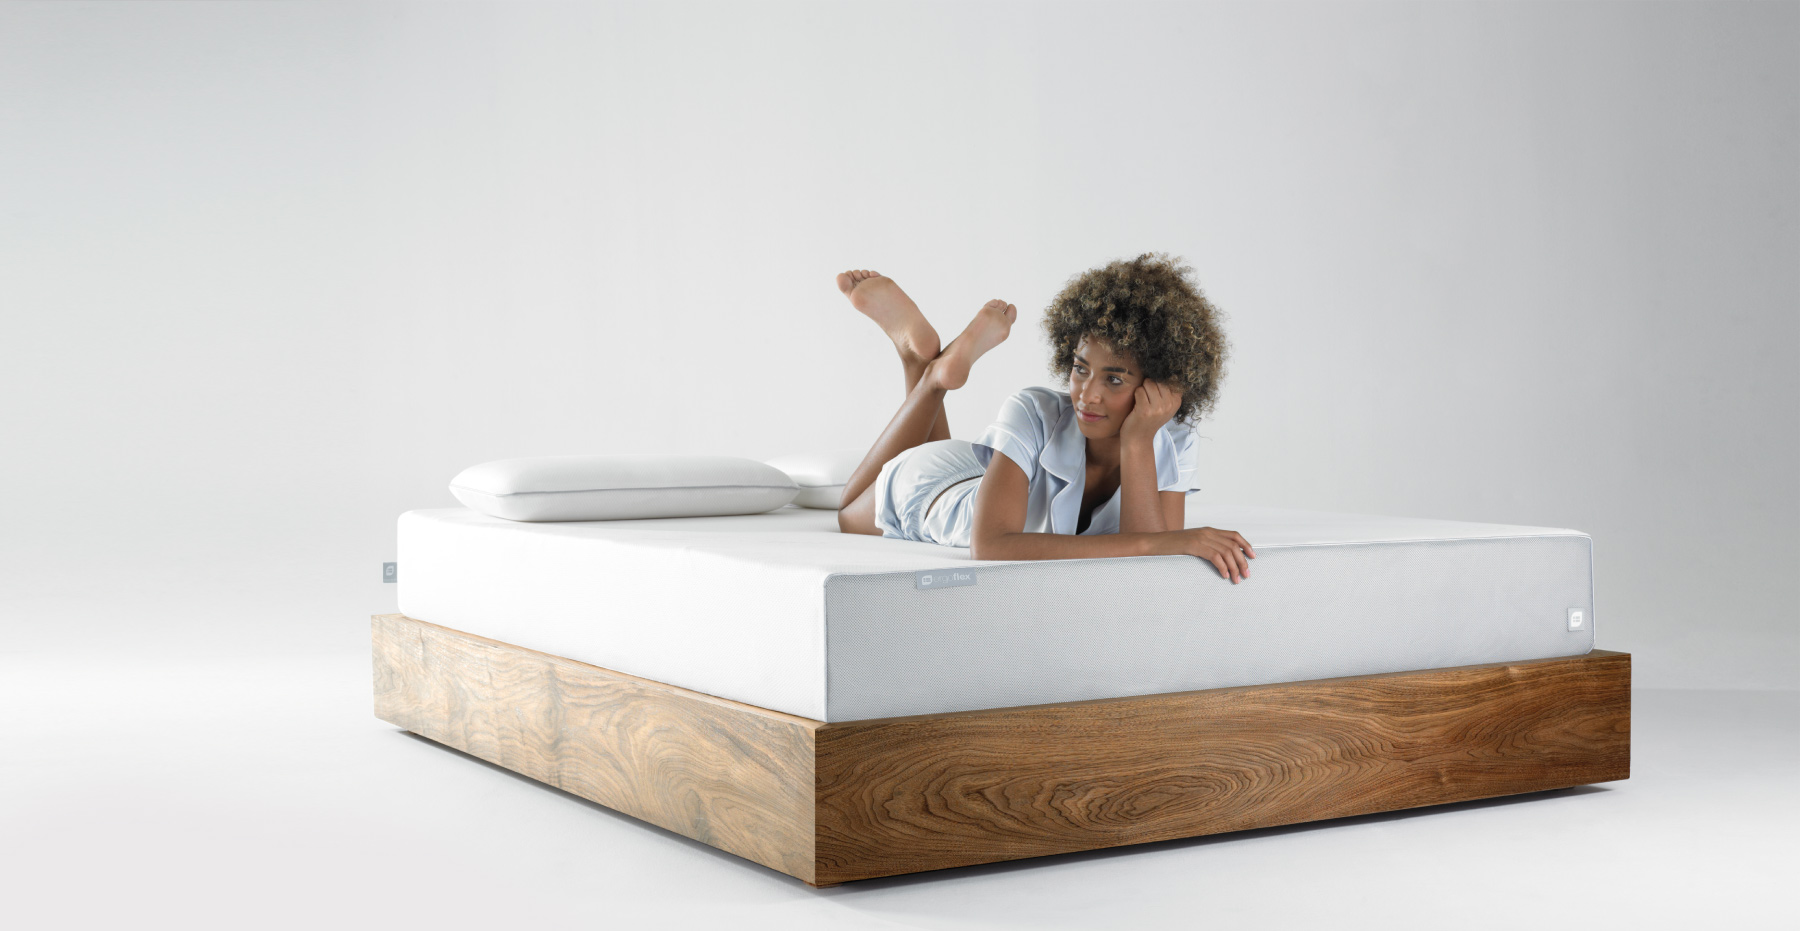 The types of mattresses for the best sleep and good health